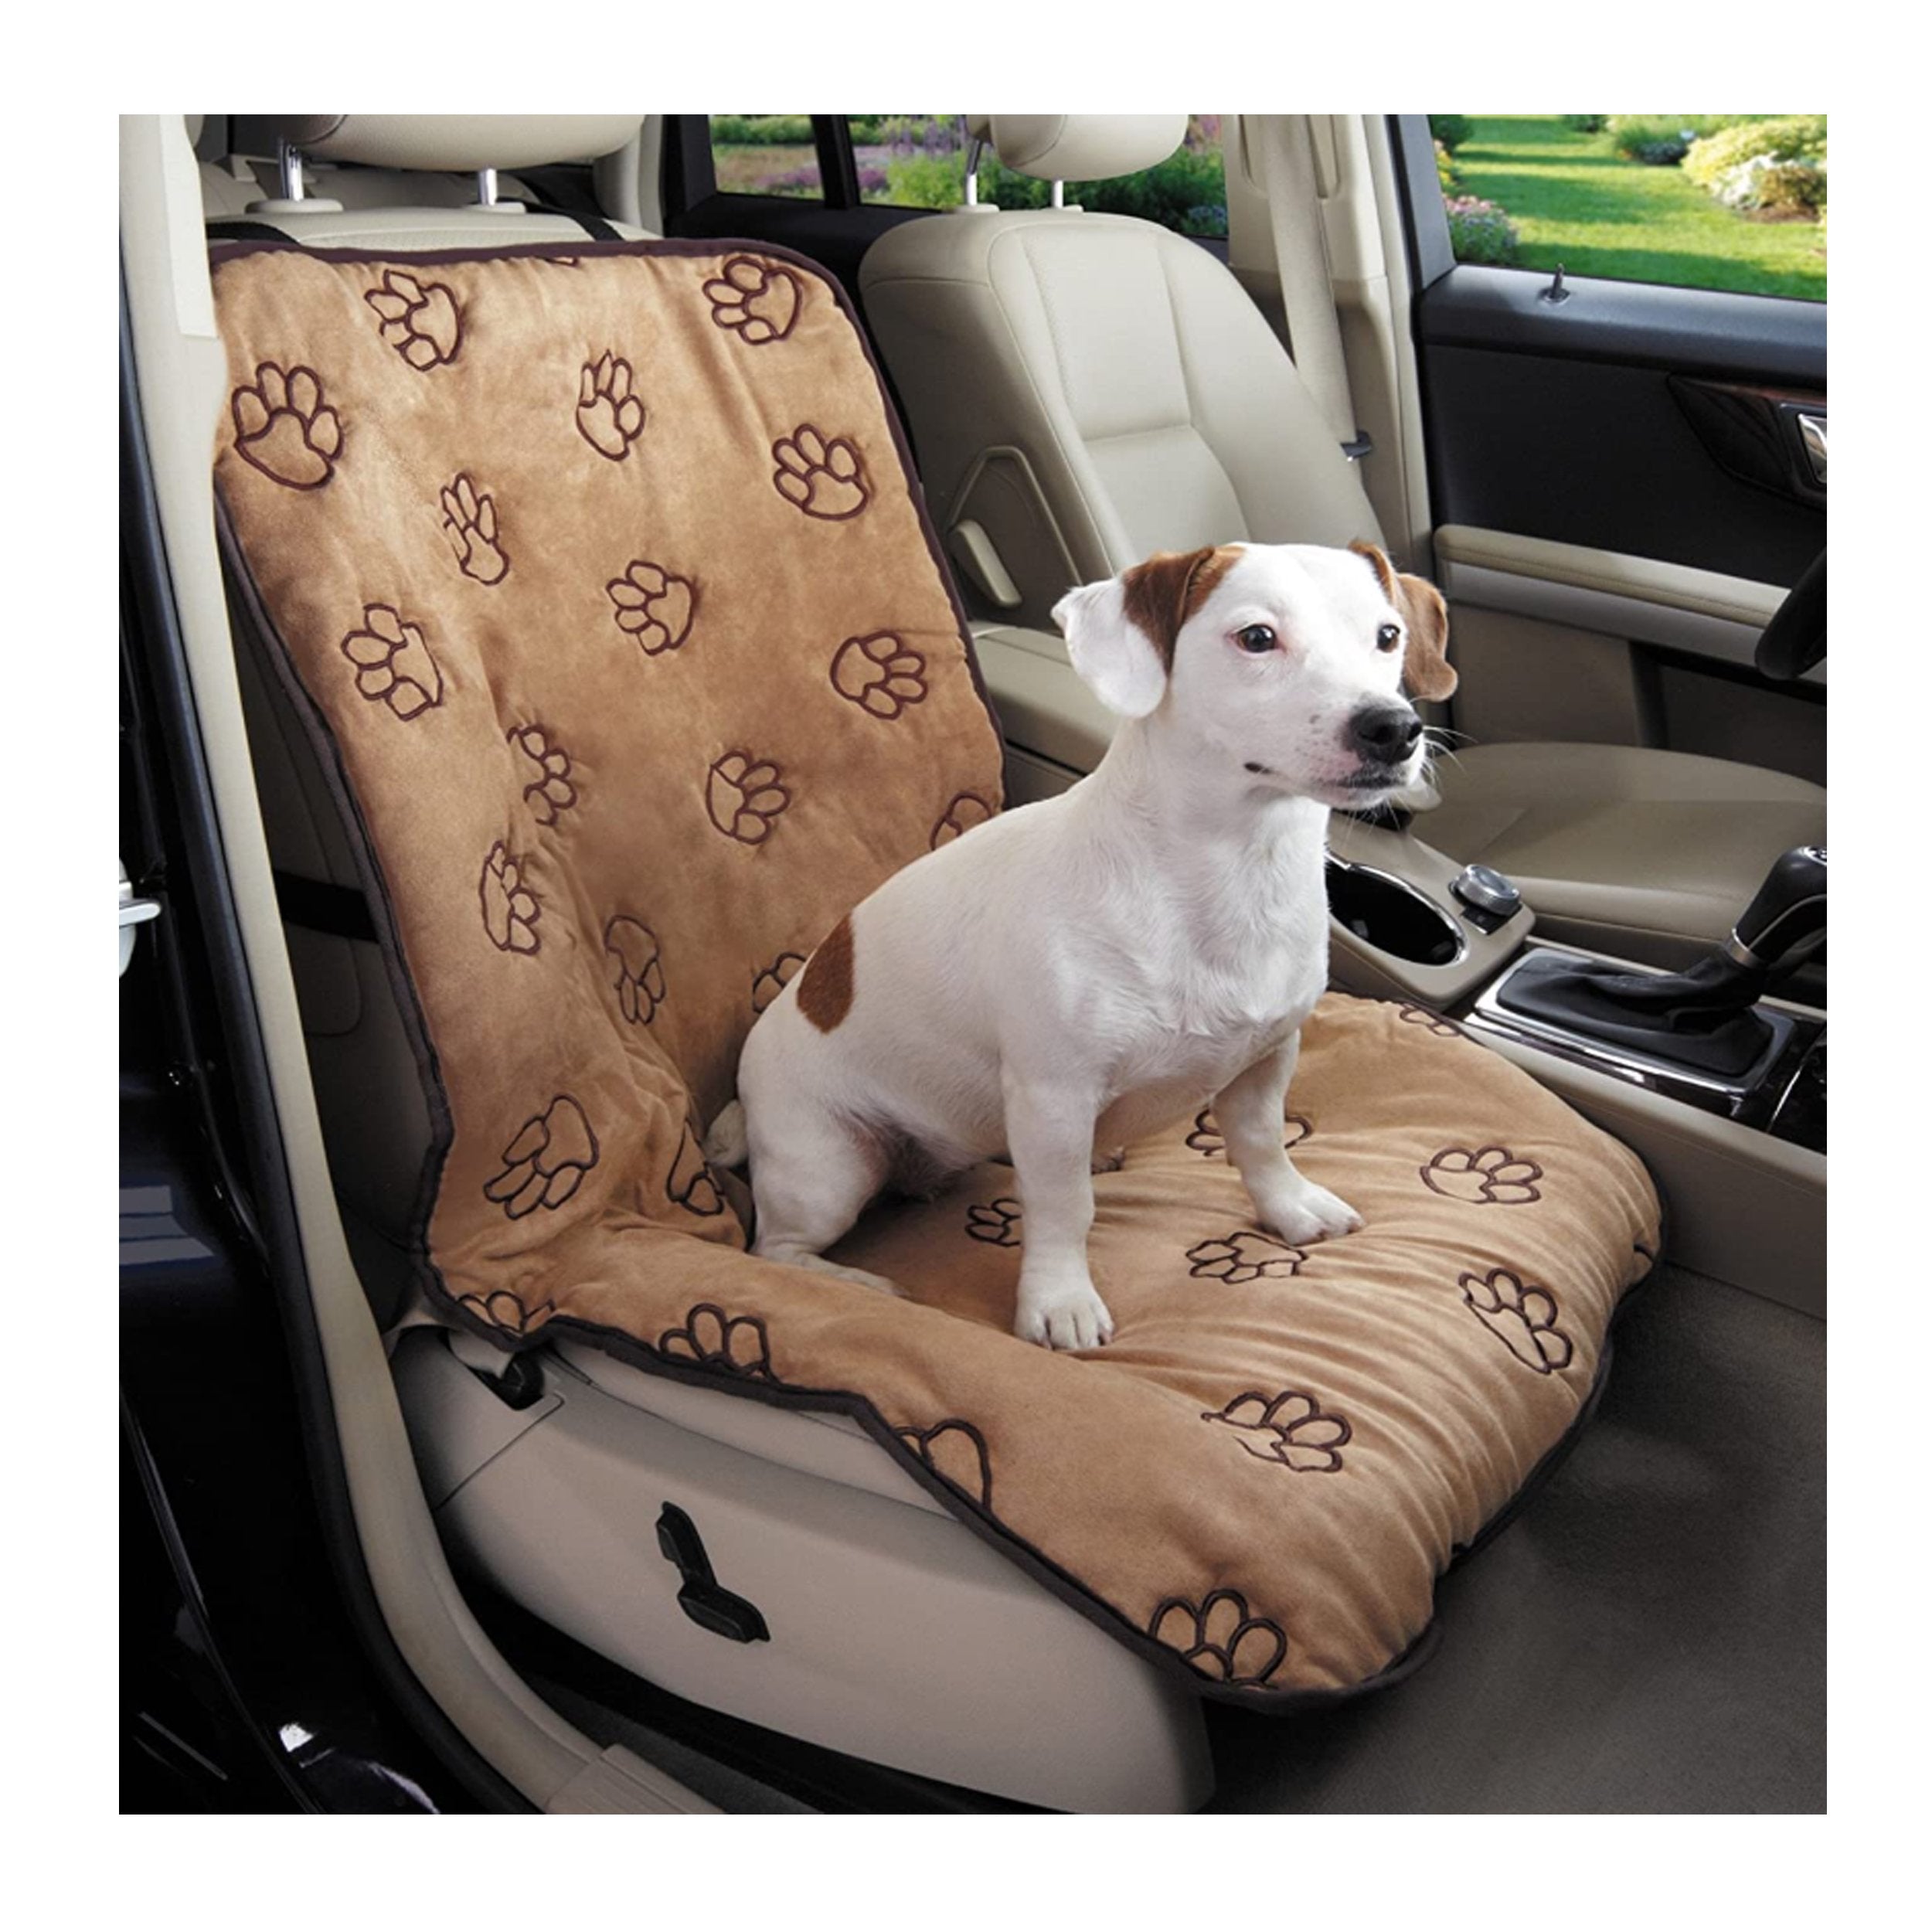 Cruising Companion Single Car Seat Cover Camel with Dark Brow Paw Print Pattern for Travel with Dogs for No Messy Hair on seats